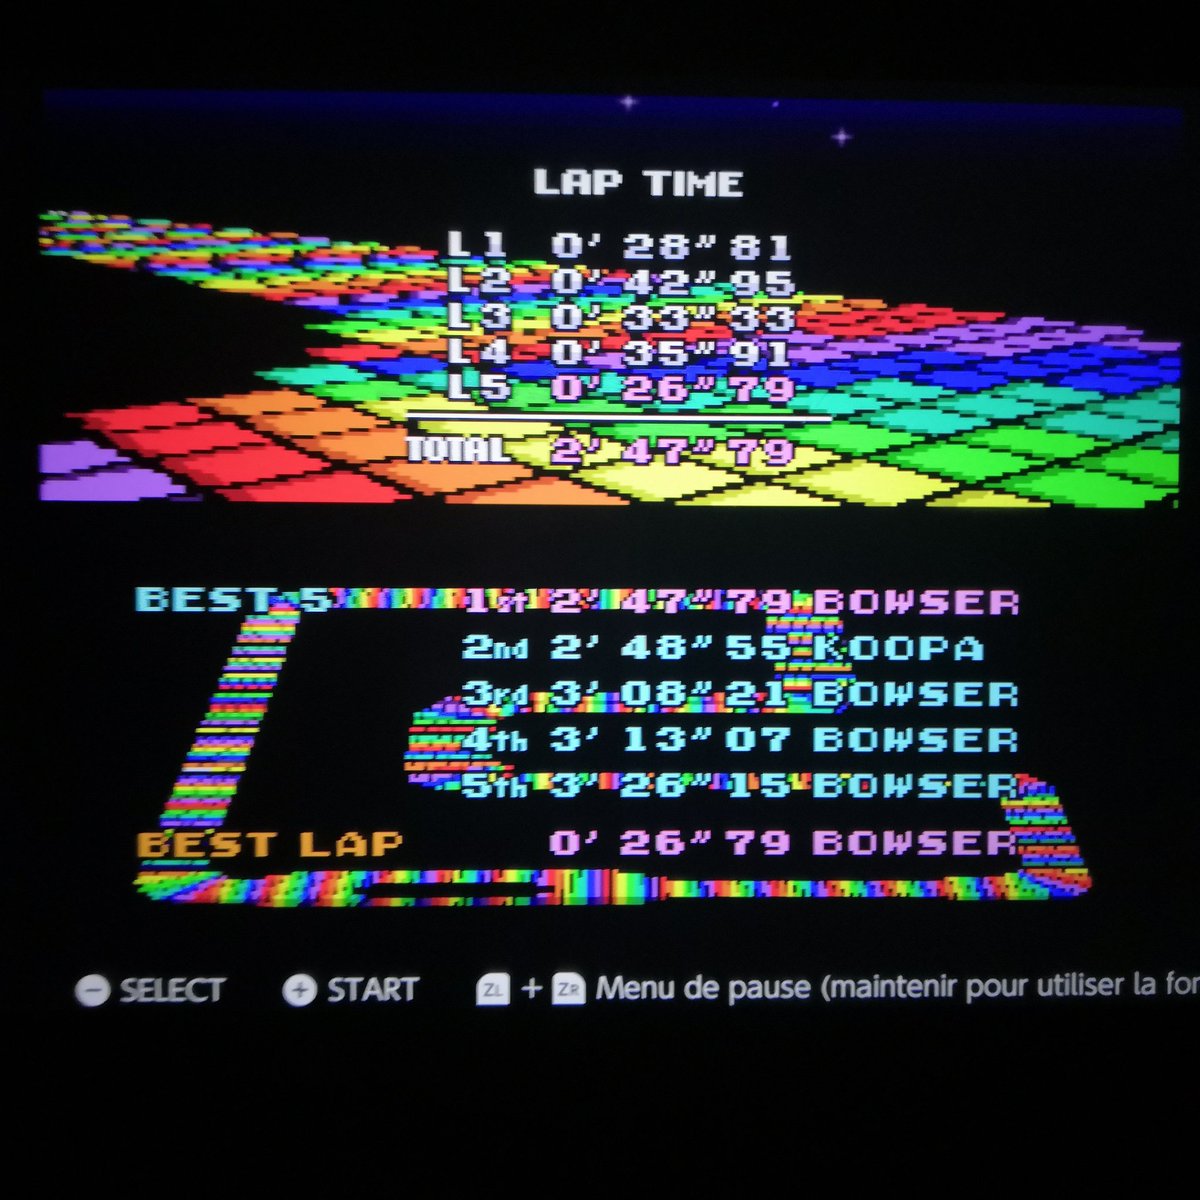 If you were wondering (you defo weren't but if you're still here you WILL be subjected to my SMK progress), I did the Rainbow Road new best time with Bowser, but then I spent the day playing another game (it had pirates!) and therefore entirely forgot how to play SMK